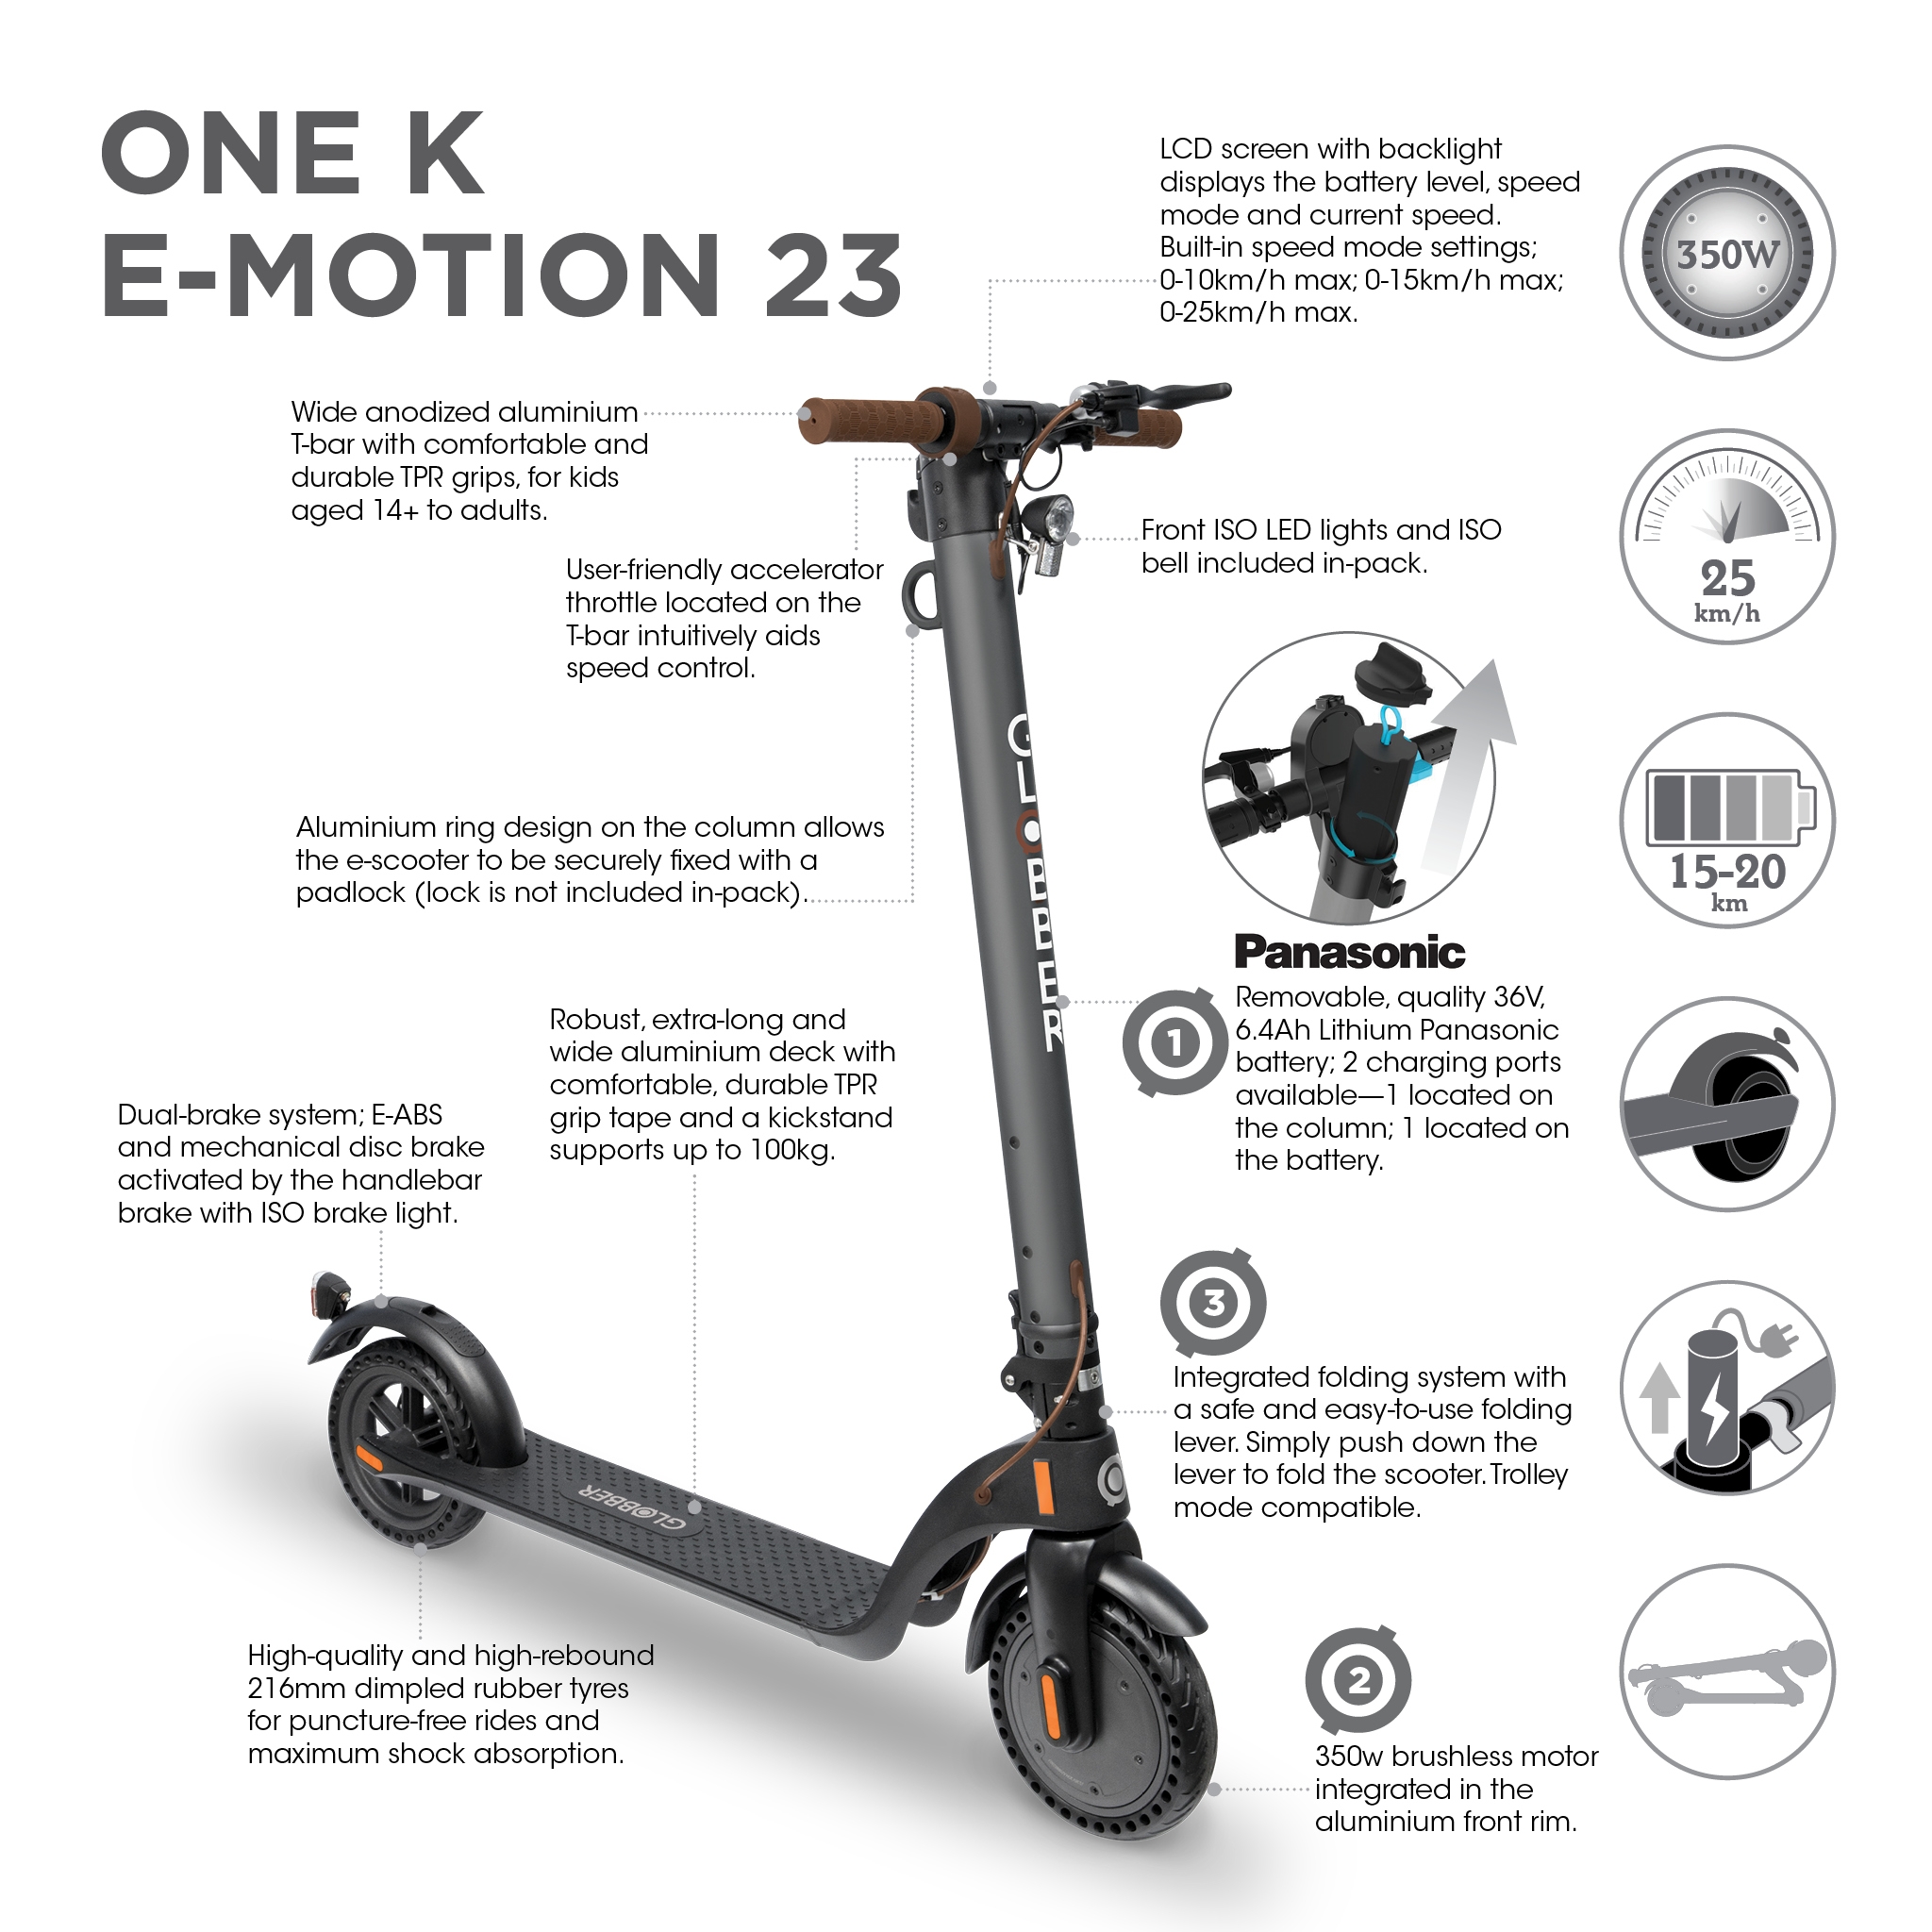 Globber-ONE-K-E-MOTION-23-electric-scooter-for-teens-and-adults-aged-14-and-above 2